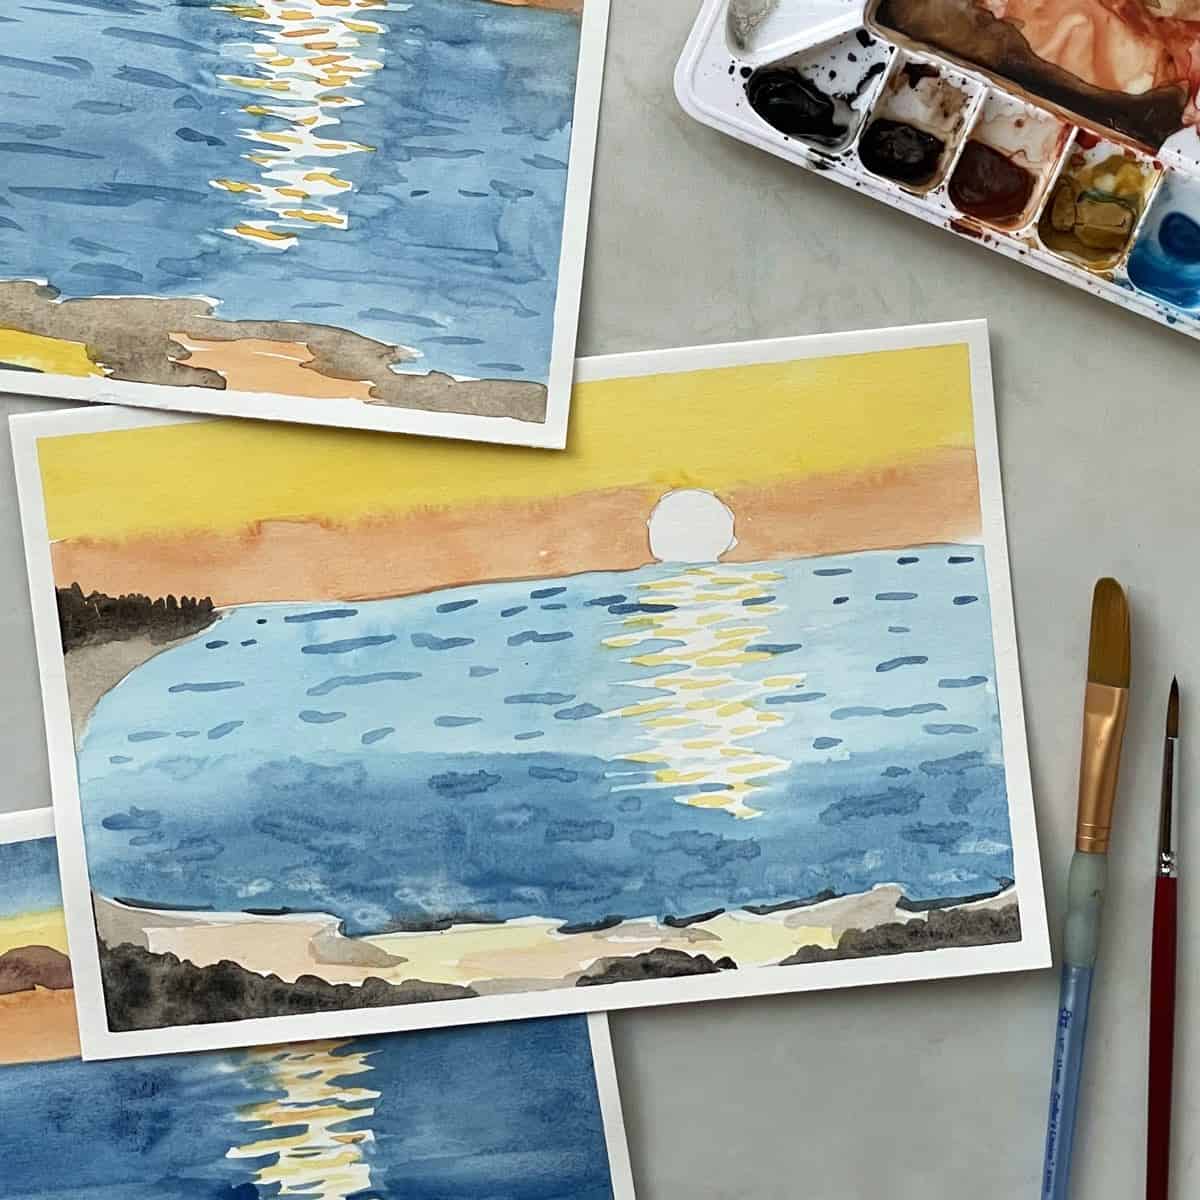 Watercolor paintings of a beach sunset next to paint brushes and watercolor paints.